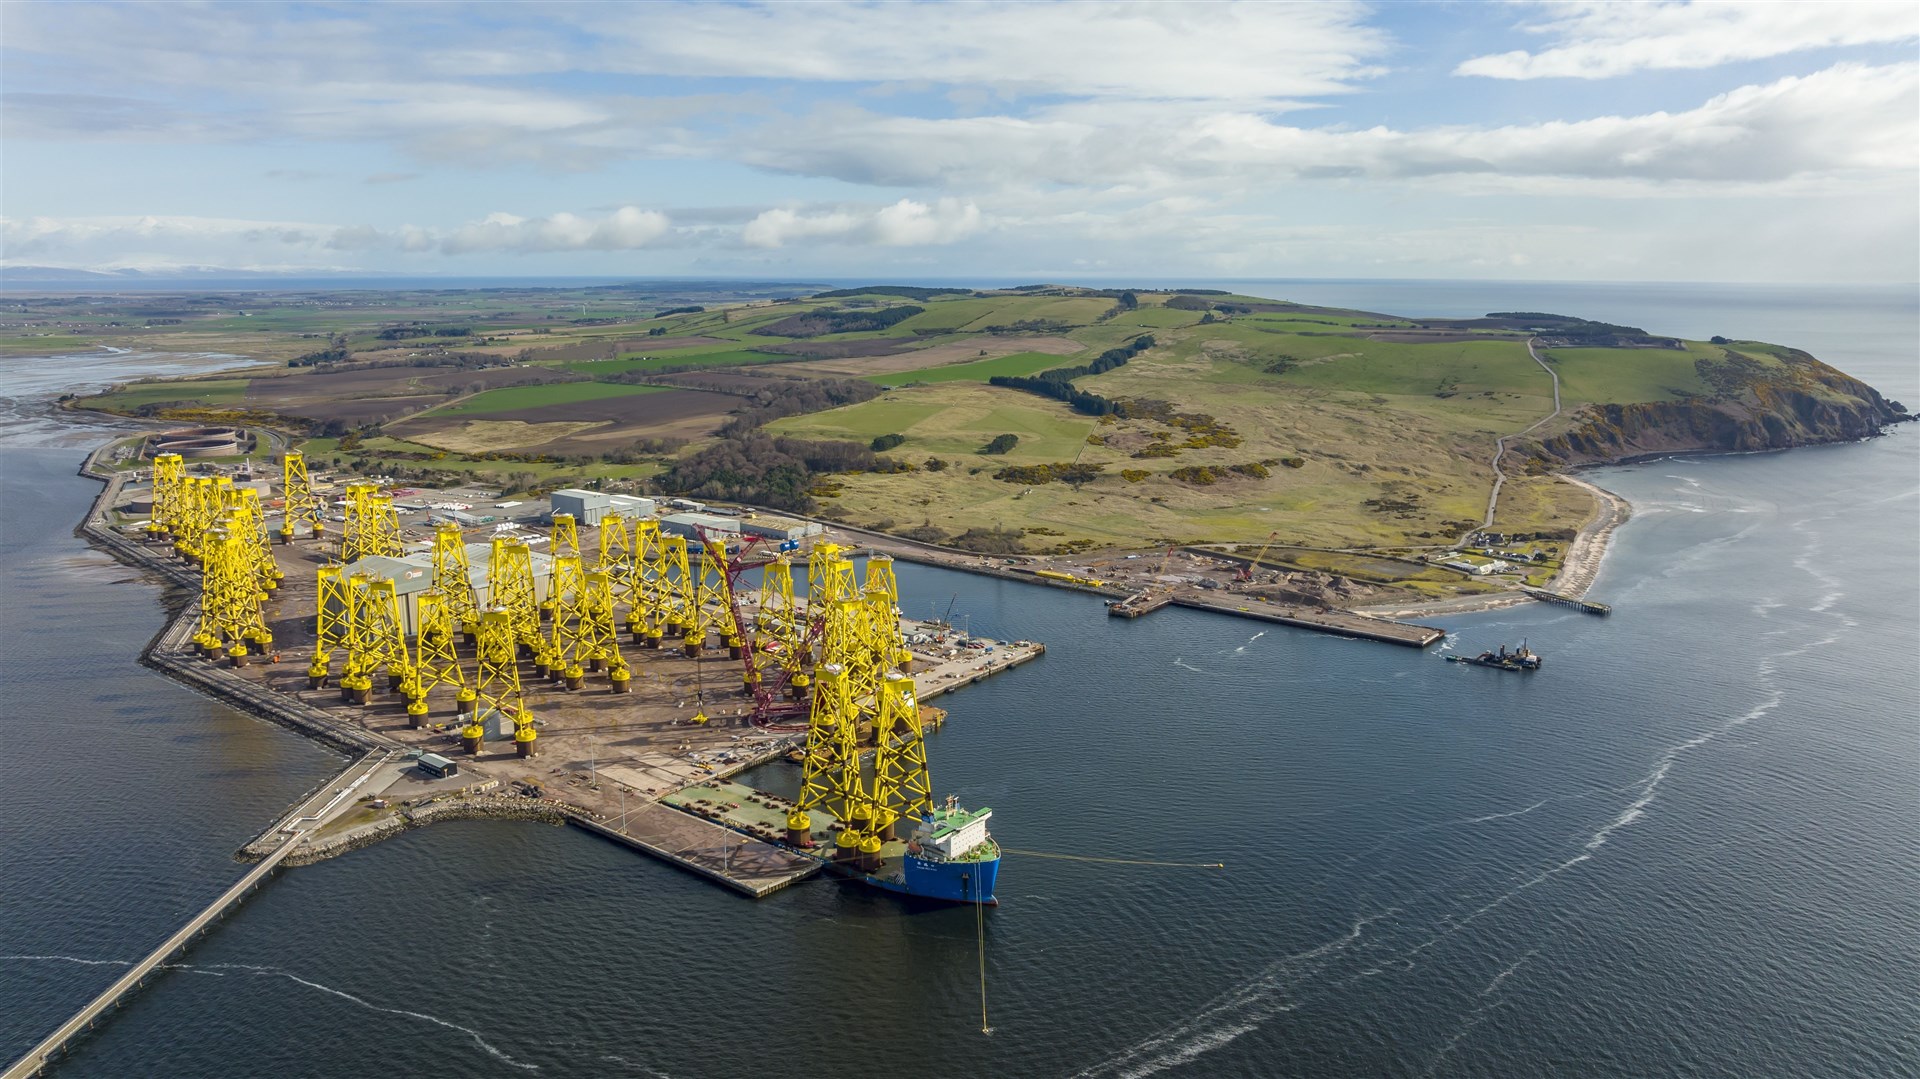 Port of Nigg, Cromarty Firth.